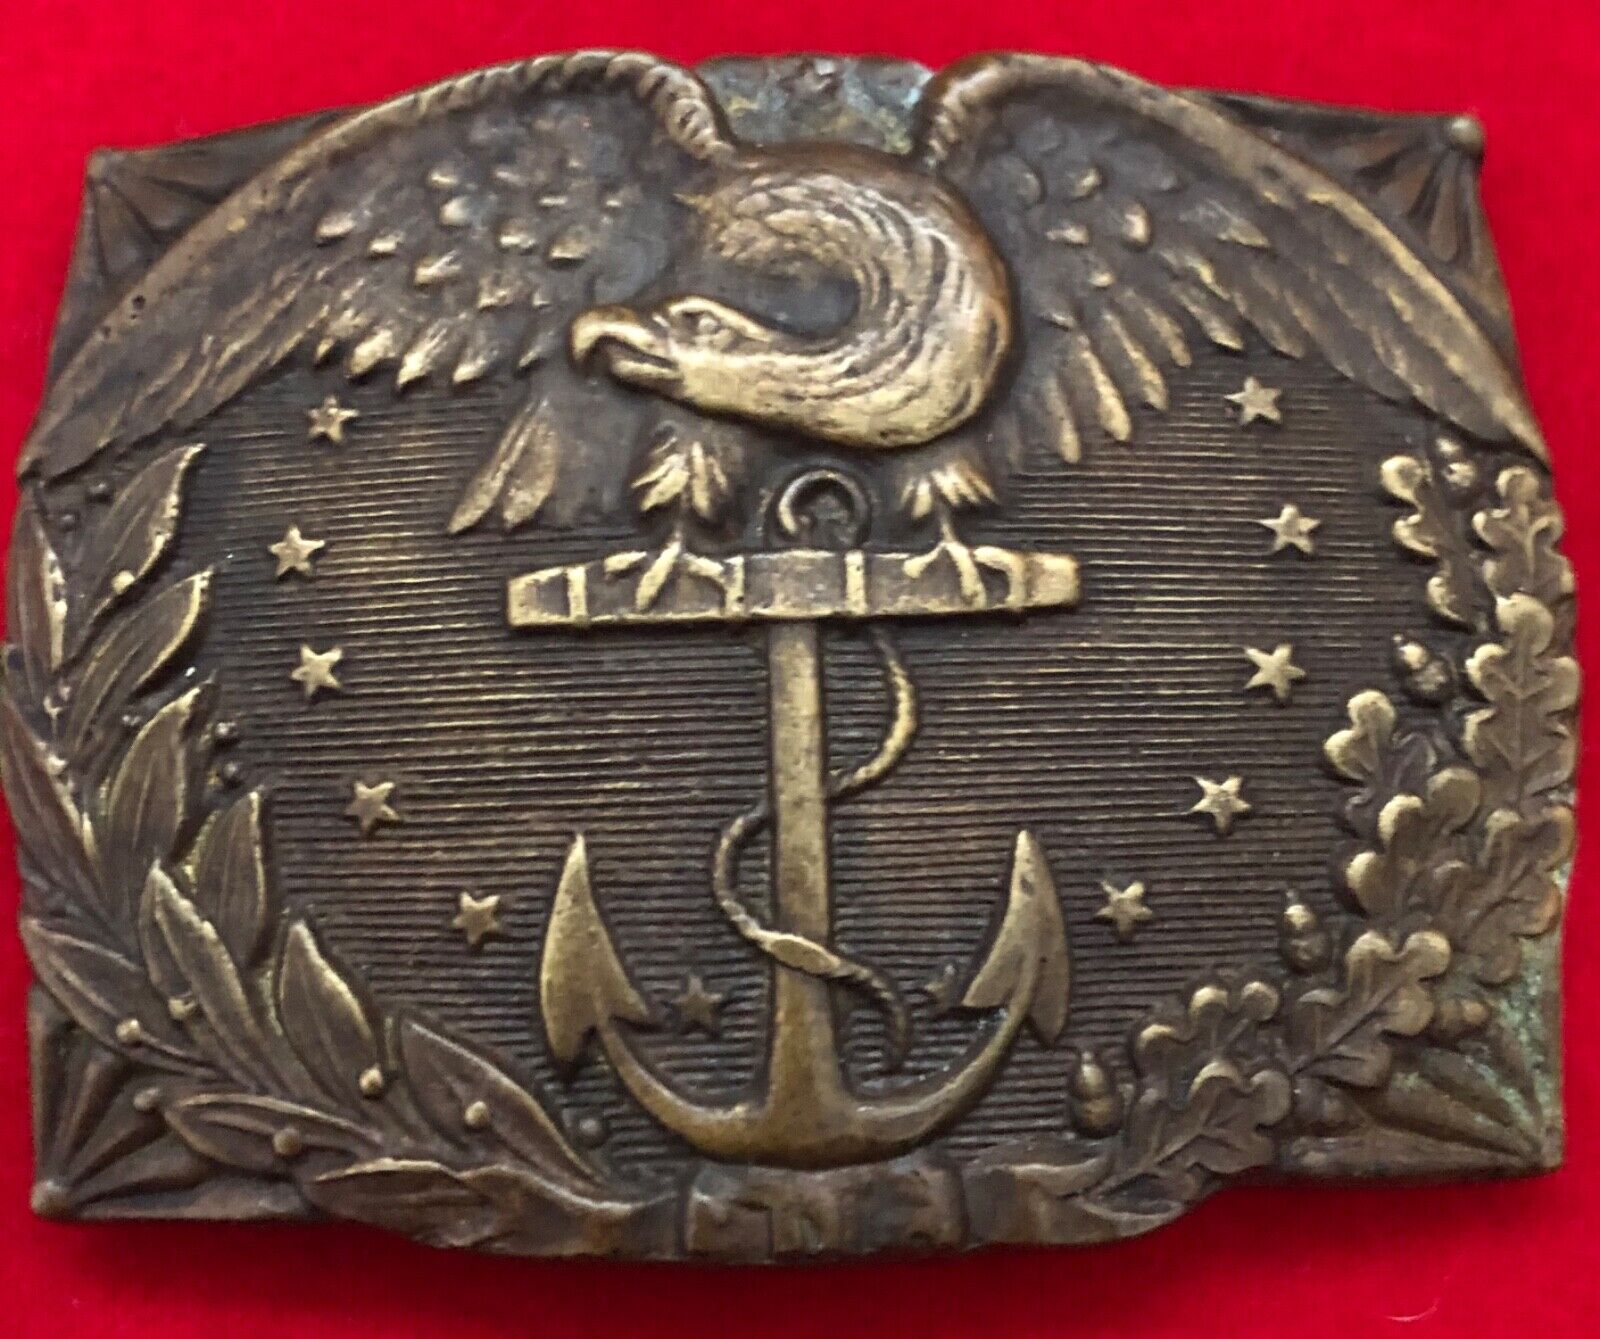 T-41 Revenue Cutter Service Buckle, Sold for years as Marine  buckle, replica